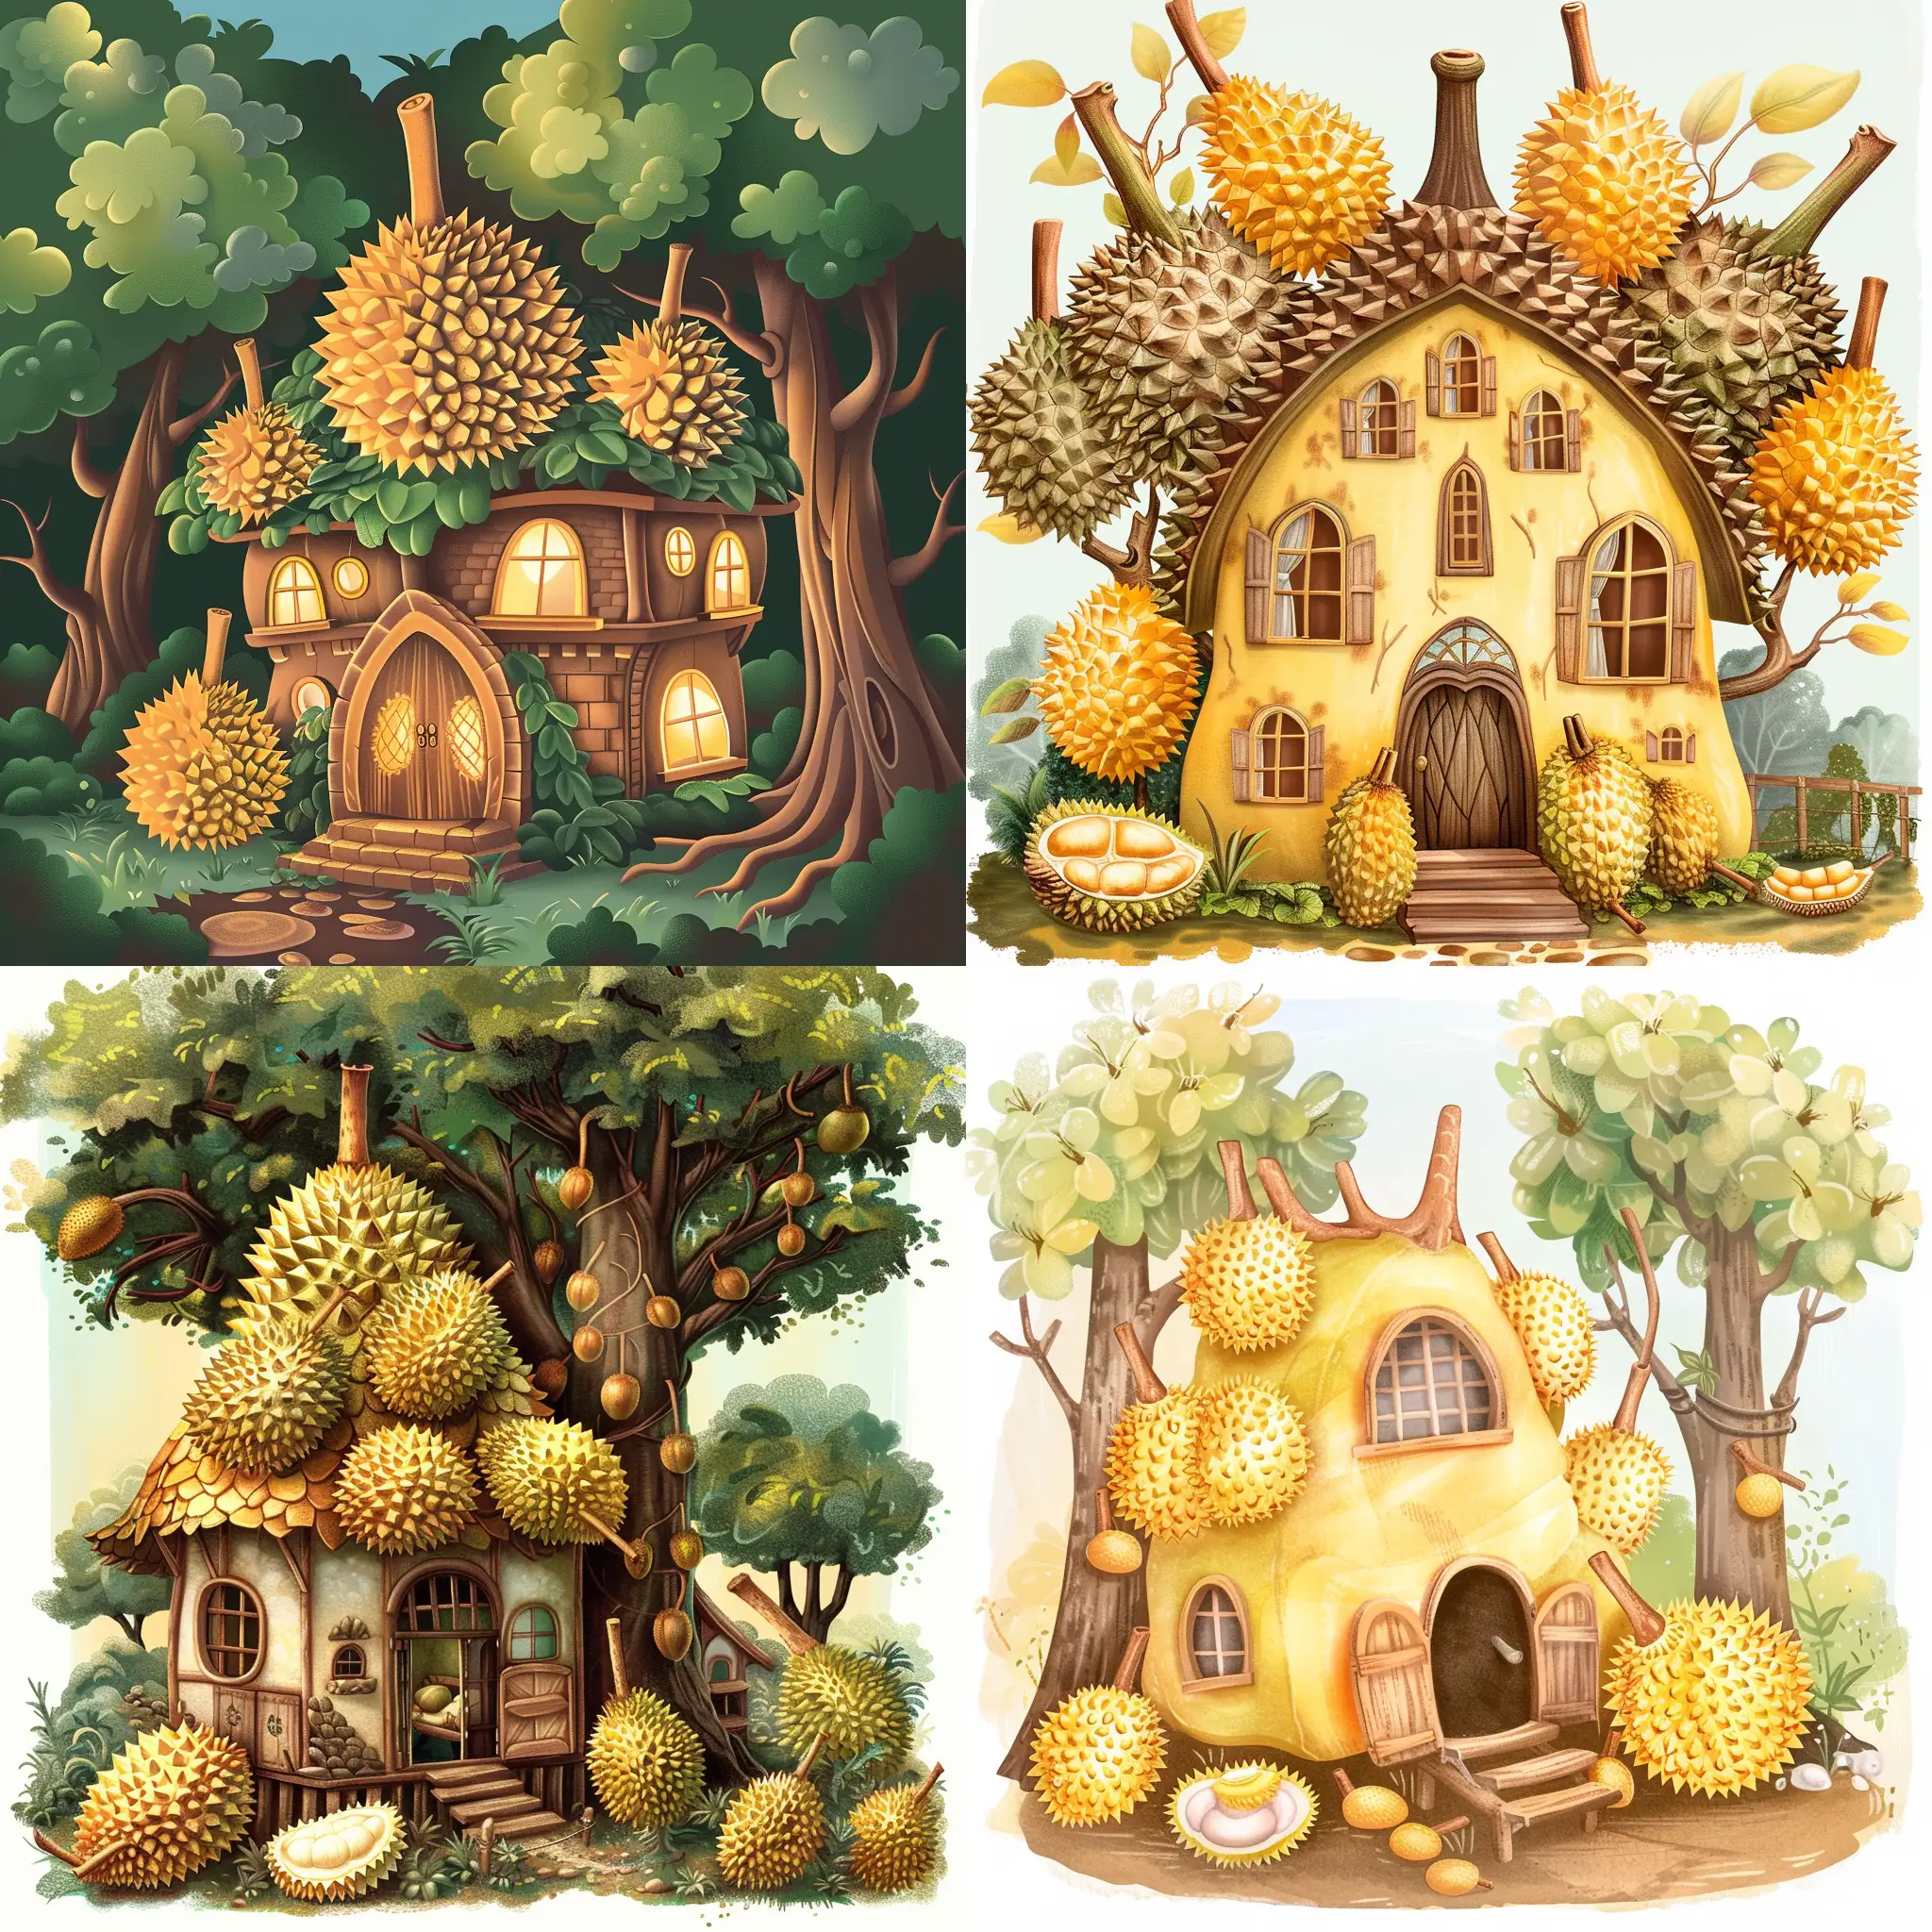 Illustration of magic house which made from durian fruit